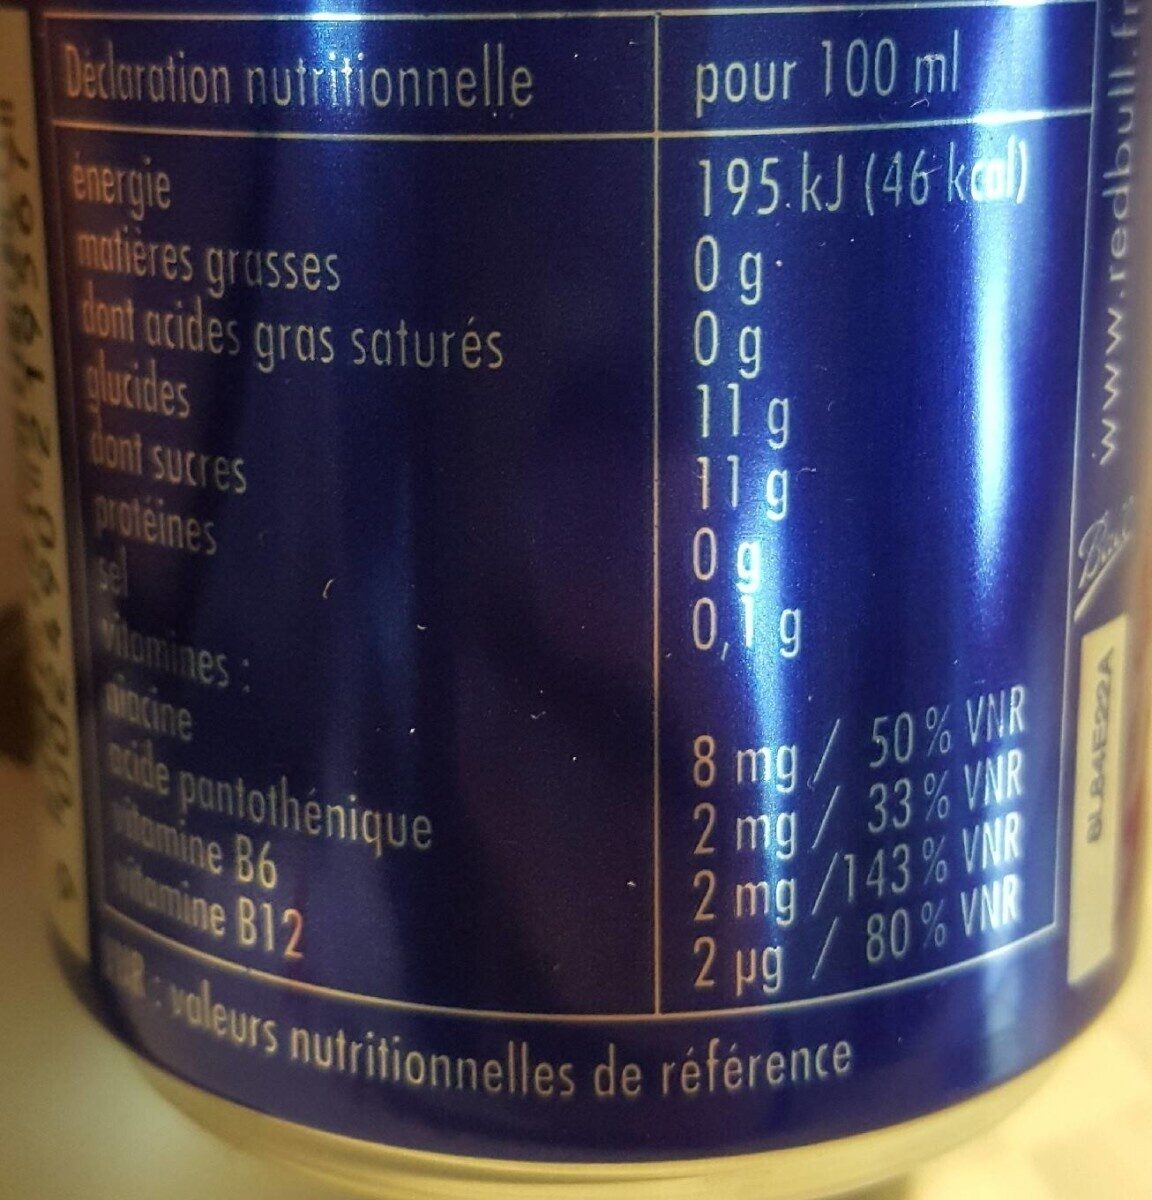 Red Bull Blue Edition - Tableau nutritionnel